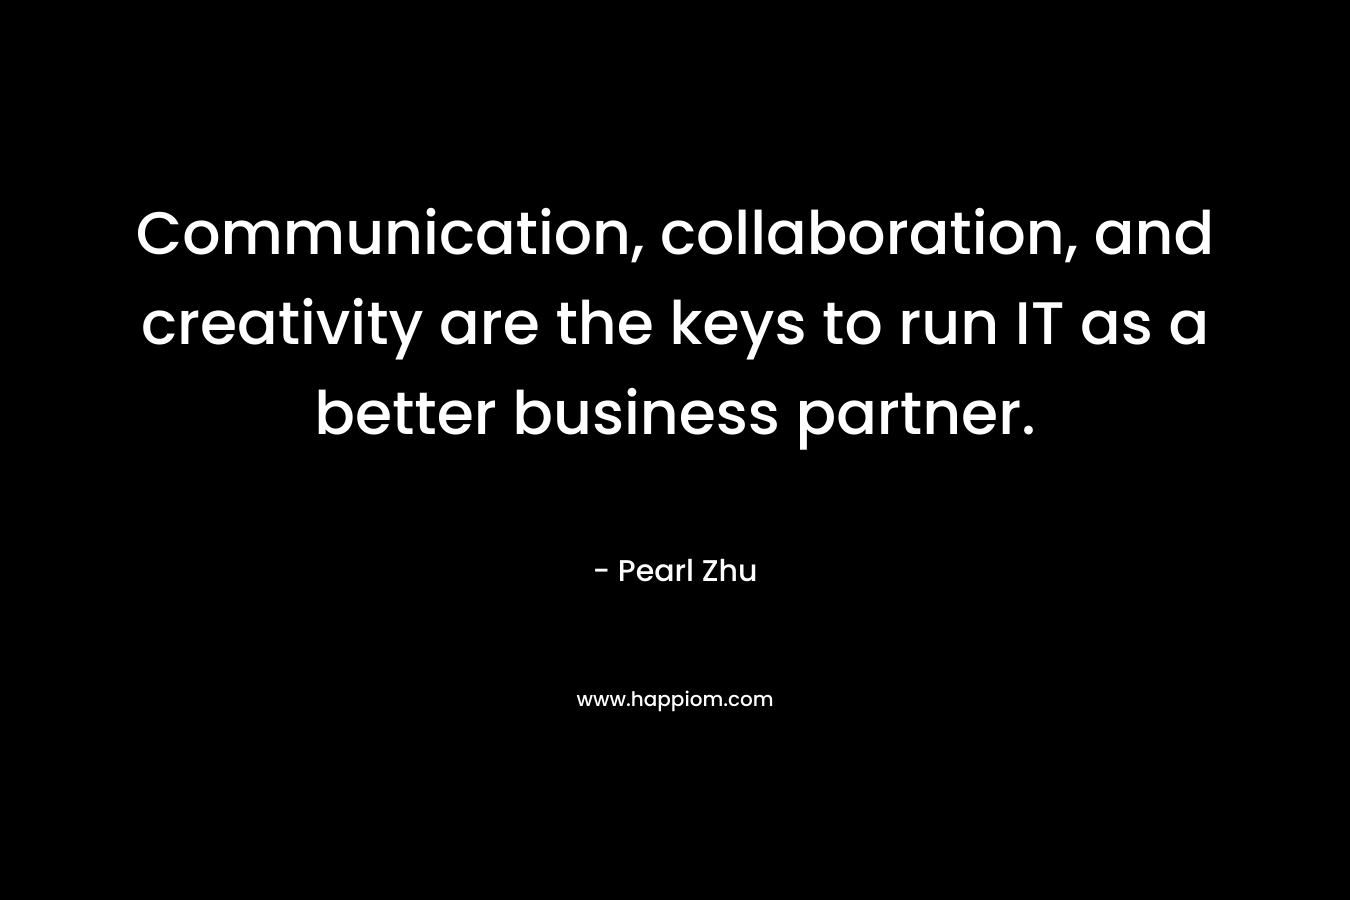 Communication, collaboration, and creativity are the keys to run IT as a better business partner.